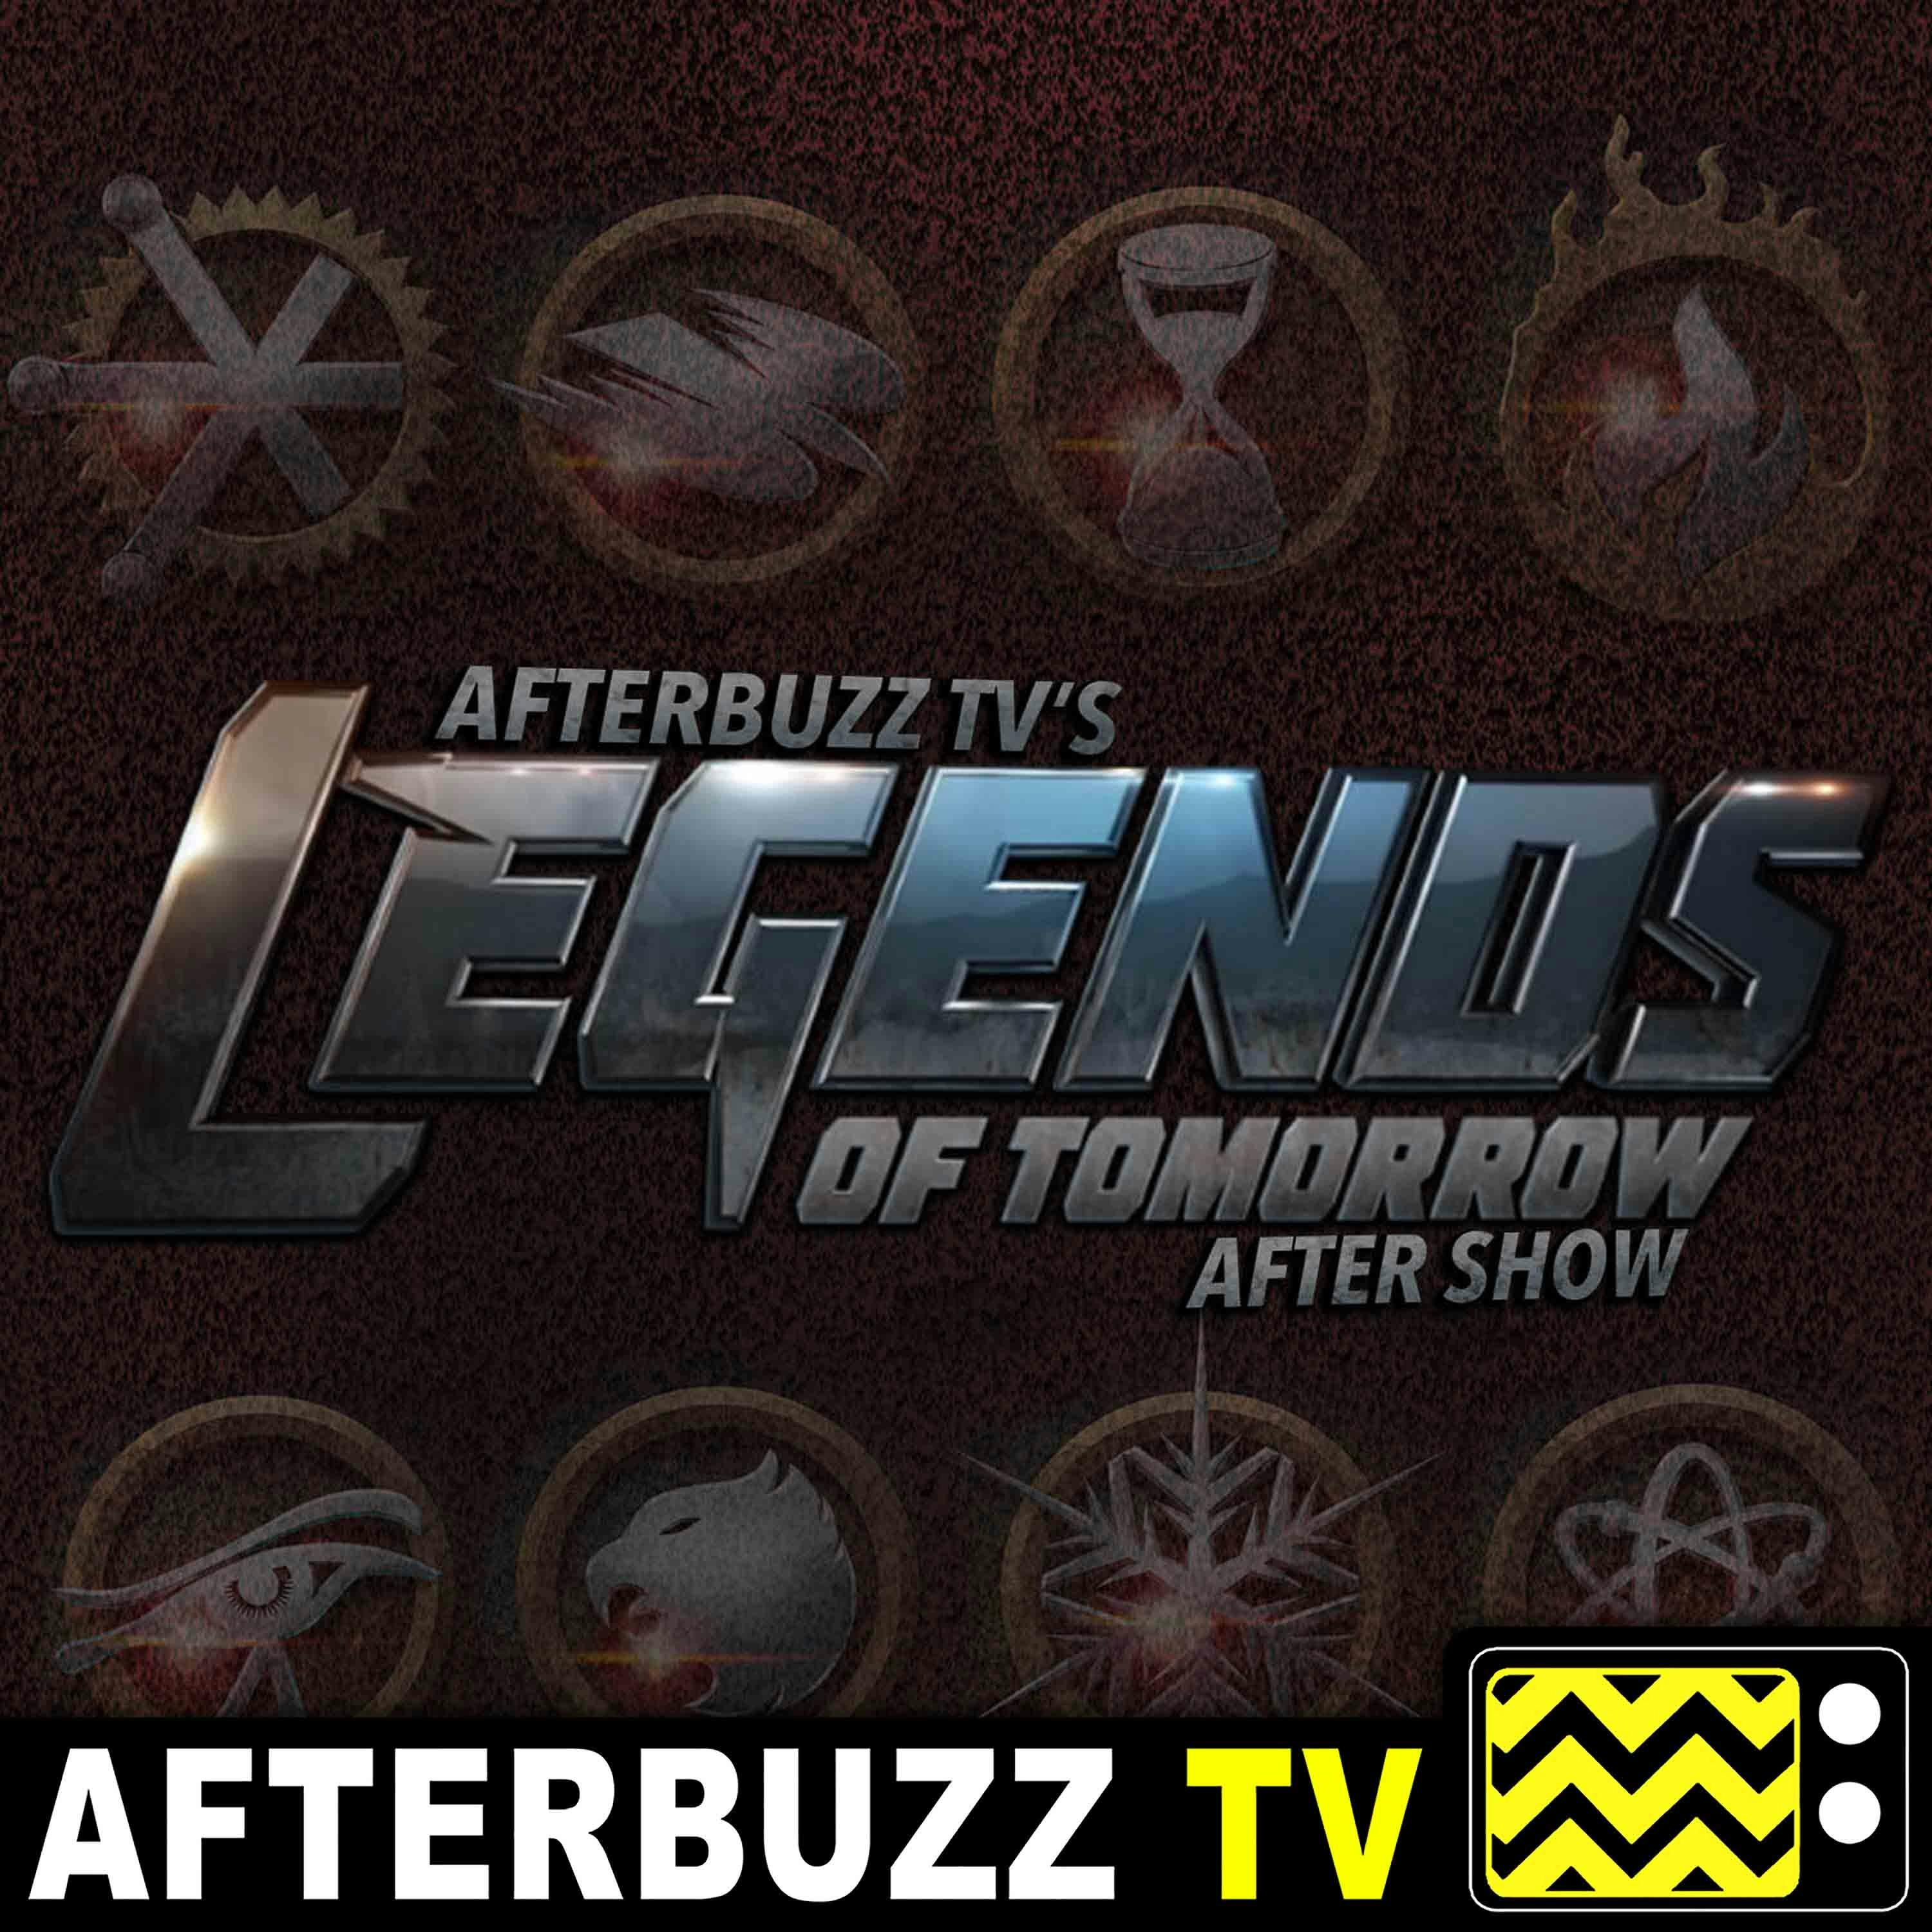 Legends Of Tomorrow S:1 | Blood Ties E:3 | AfterBuzz TV AfterShow